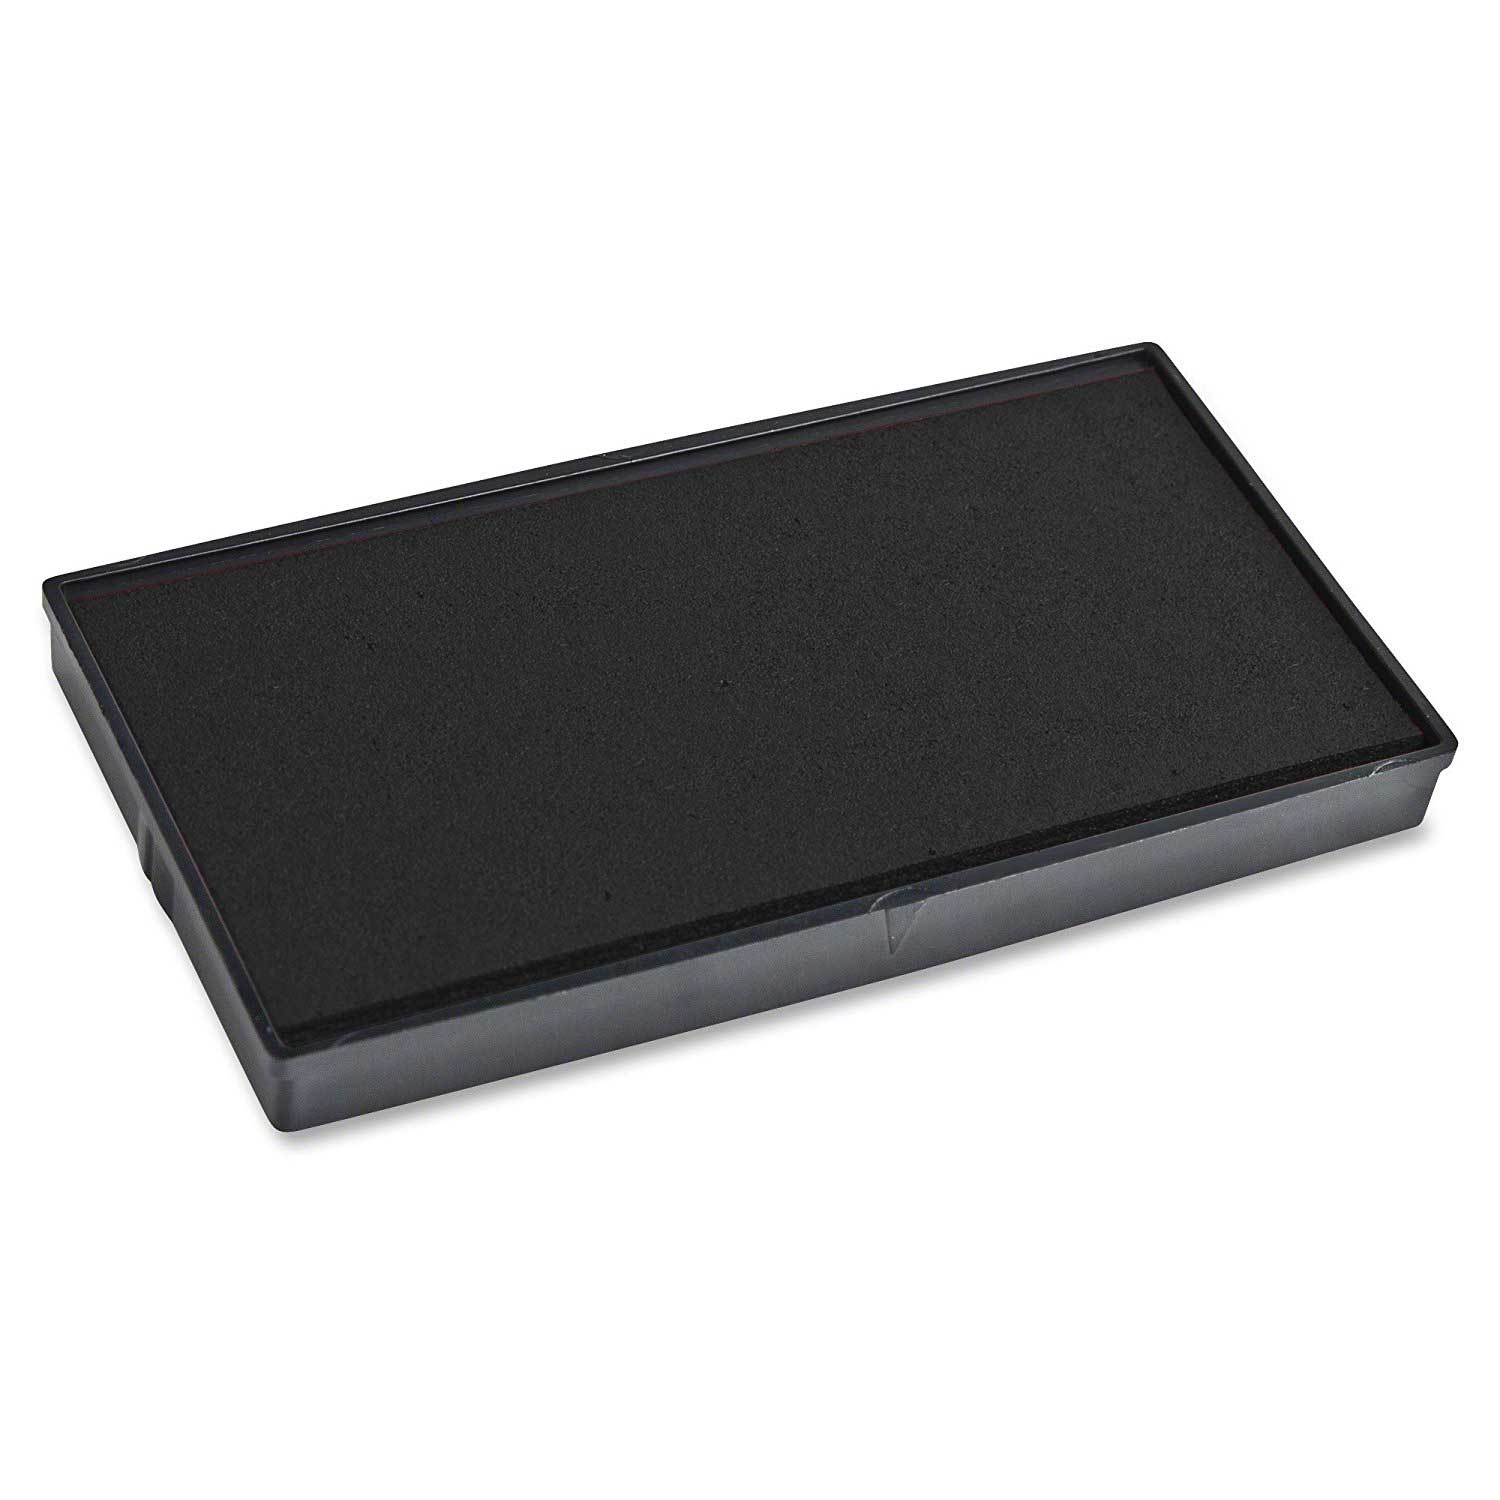 Replacement Pad for 2000 PLUS Printer 60 Self Inking Stamp - Black Ink Color